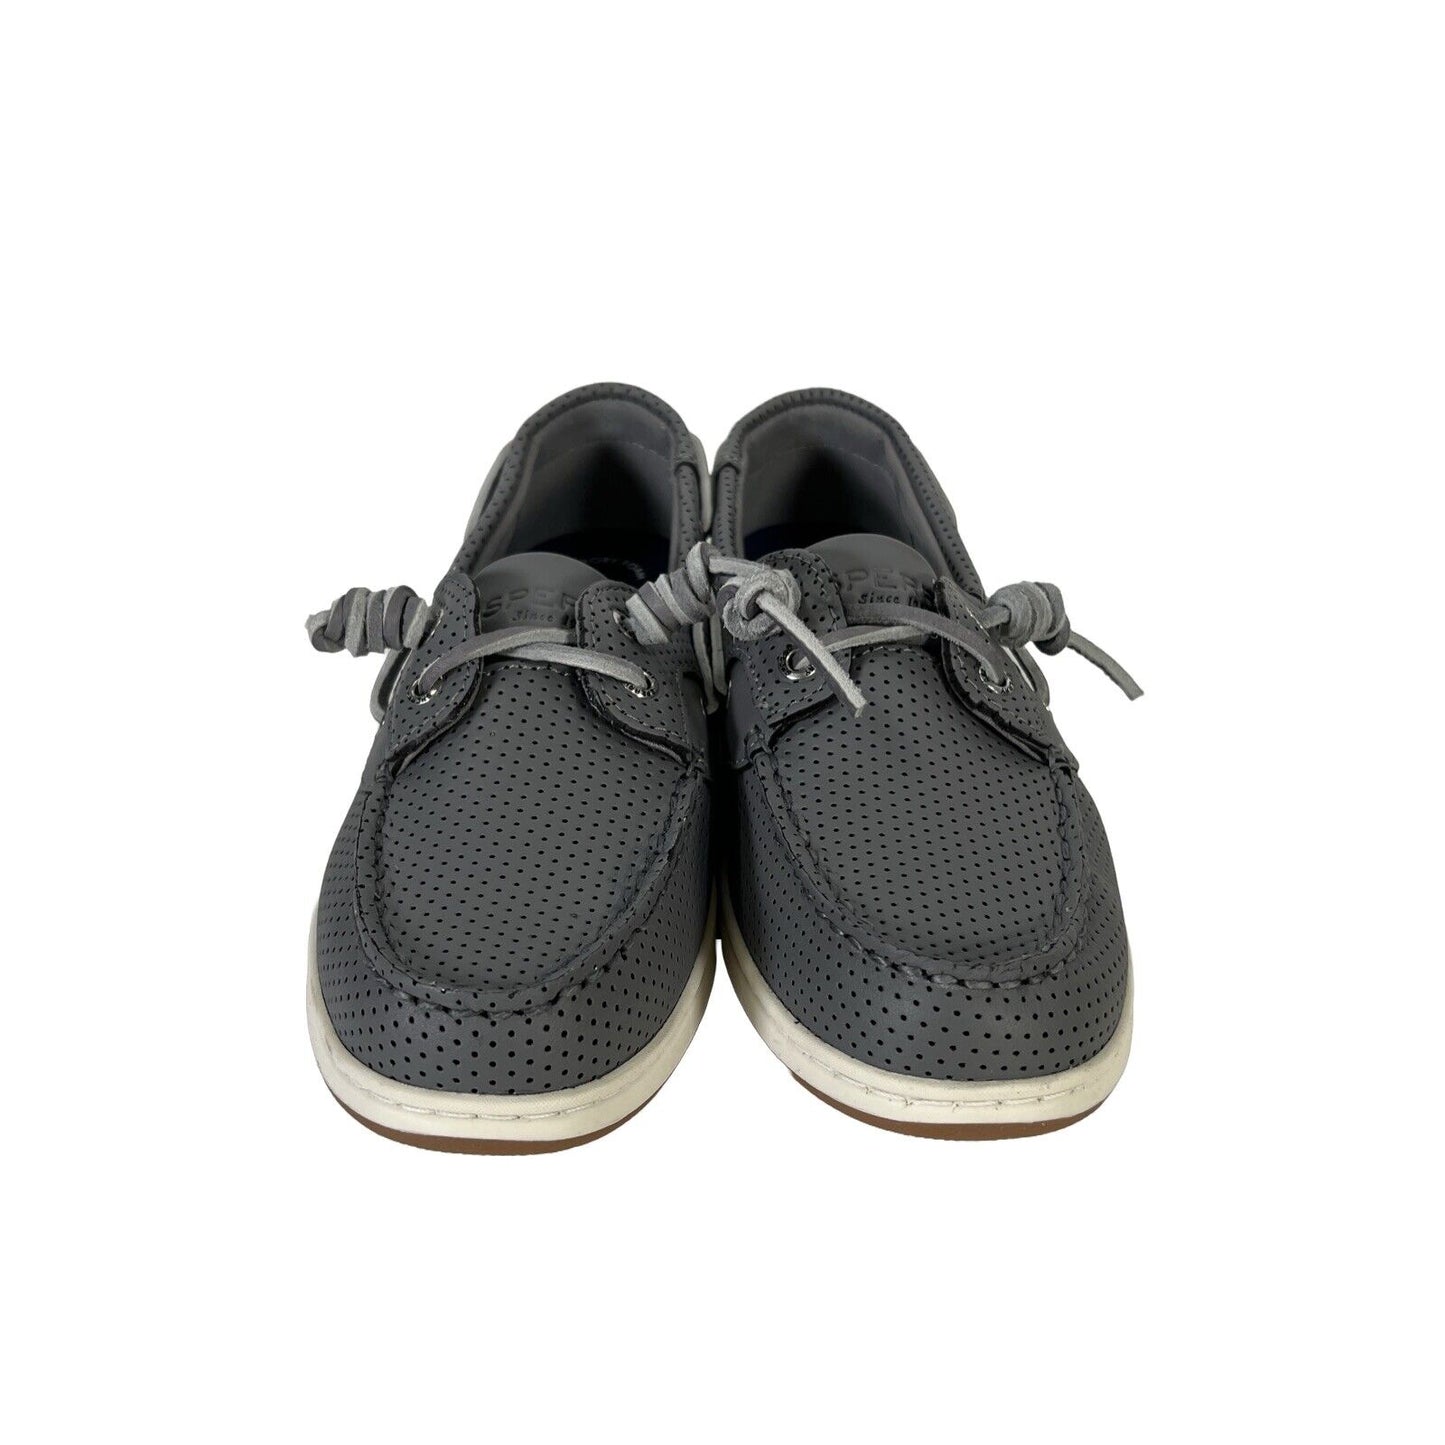 Sperry Women's Gray Leather Perforated Crest Boat Shoes - 7.5